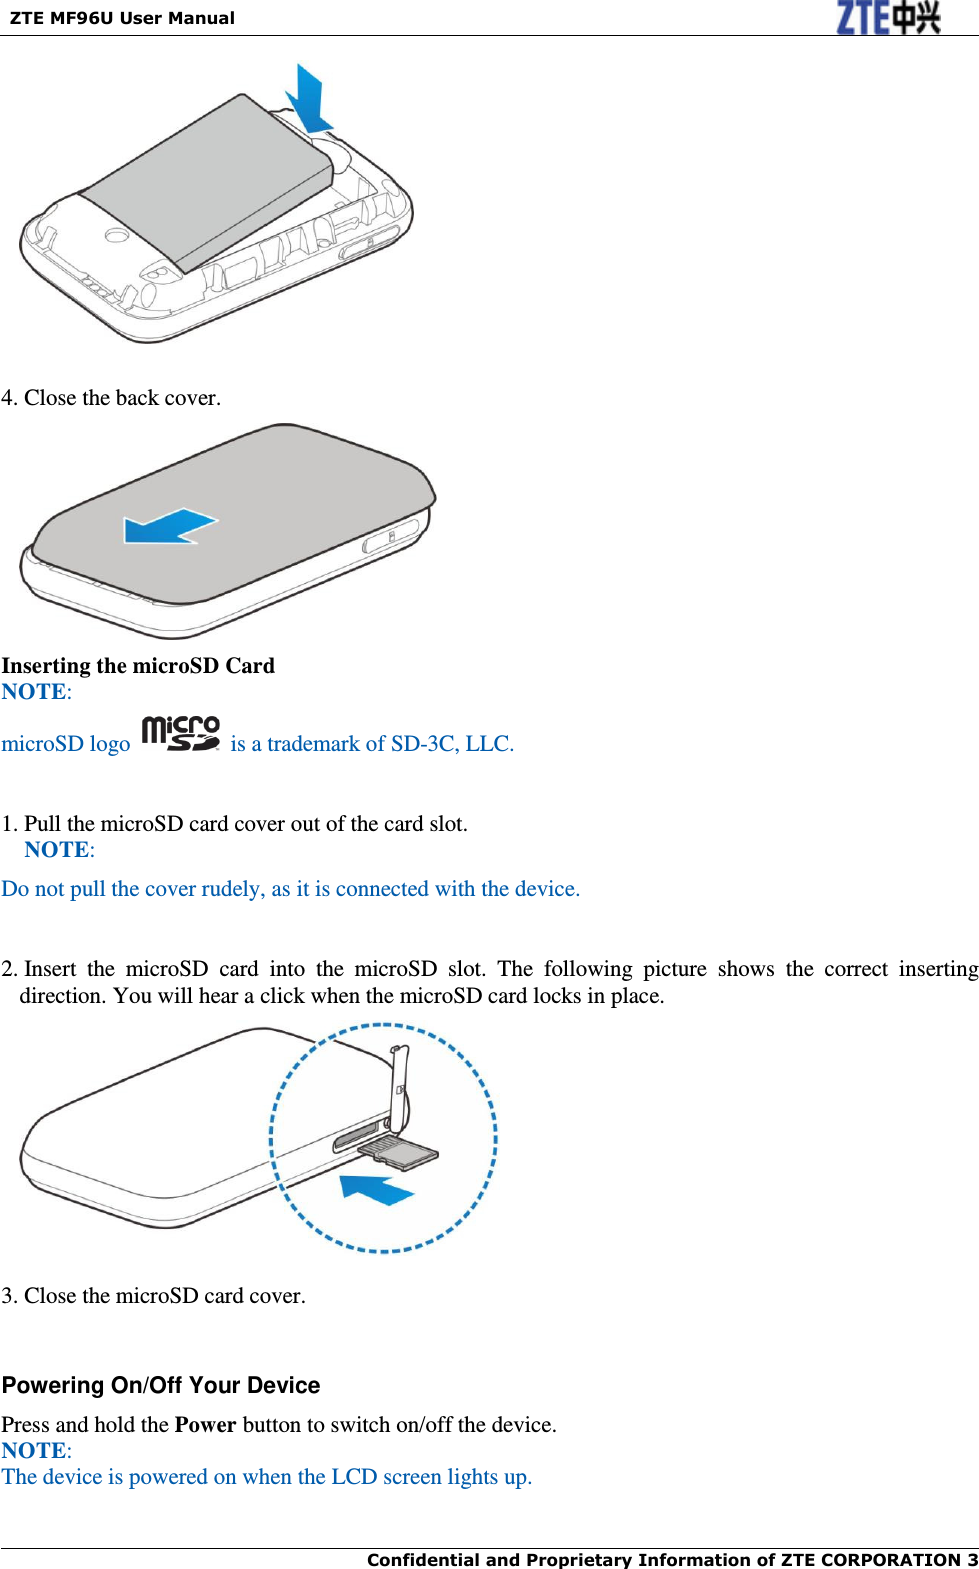   ZTE MF96U User Manual  Confidential and Proprietary Information of ZTE CORPORATION 3       4. Close the back cover.  Inserting the microSD Card NOTE: microSD logo    is a trademark of SD-3C, LLC.  1. Pull the microSD card cover out of the card slot. NOTE: Do not pull the cover rudely, as it is connected with the device.     2. Insert  the  microSD  card  into  the  microSD  slot.  The  following  picture  shows  the  correct  inserting direction. You will hear a click when the microSD card locks in place.   3. Close the microSD card cover.  Powering On/Off Your Device Press and hold the Power button to switch on/off the device. NOTE:   The device is powered on when the LCD screen lights up.    